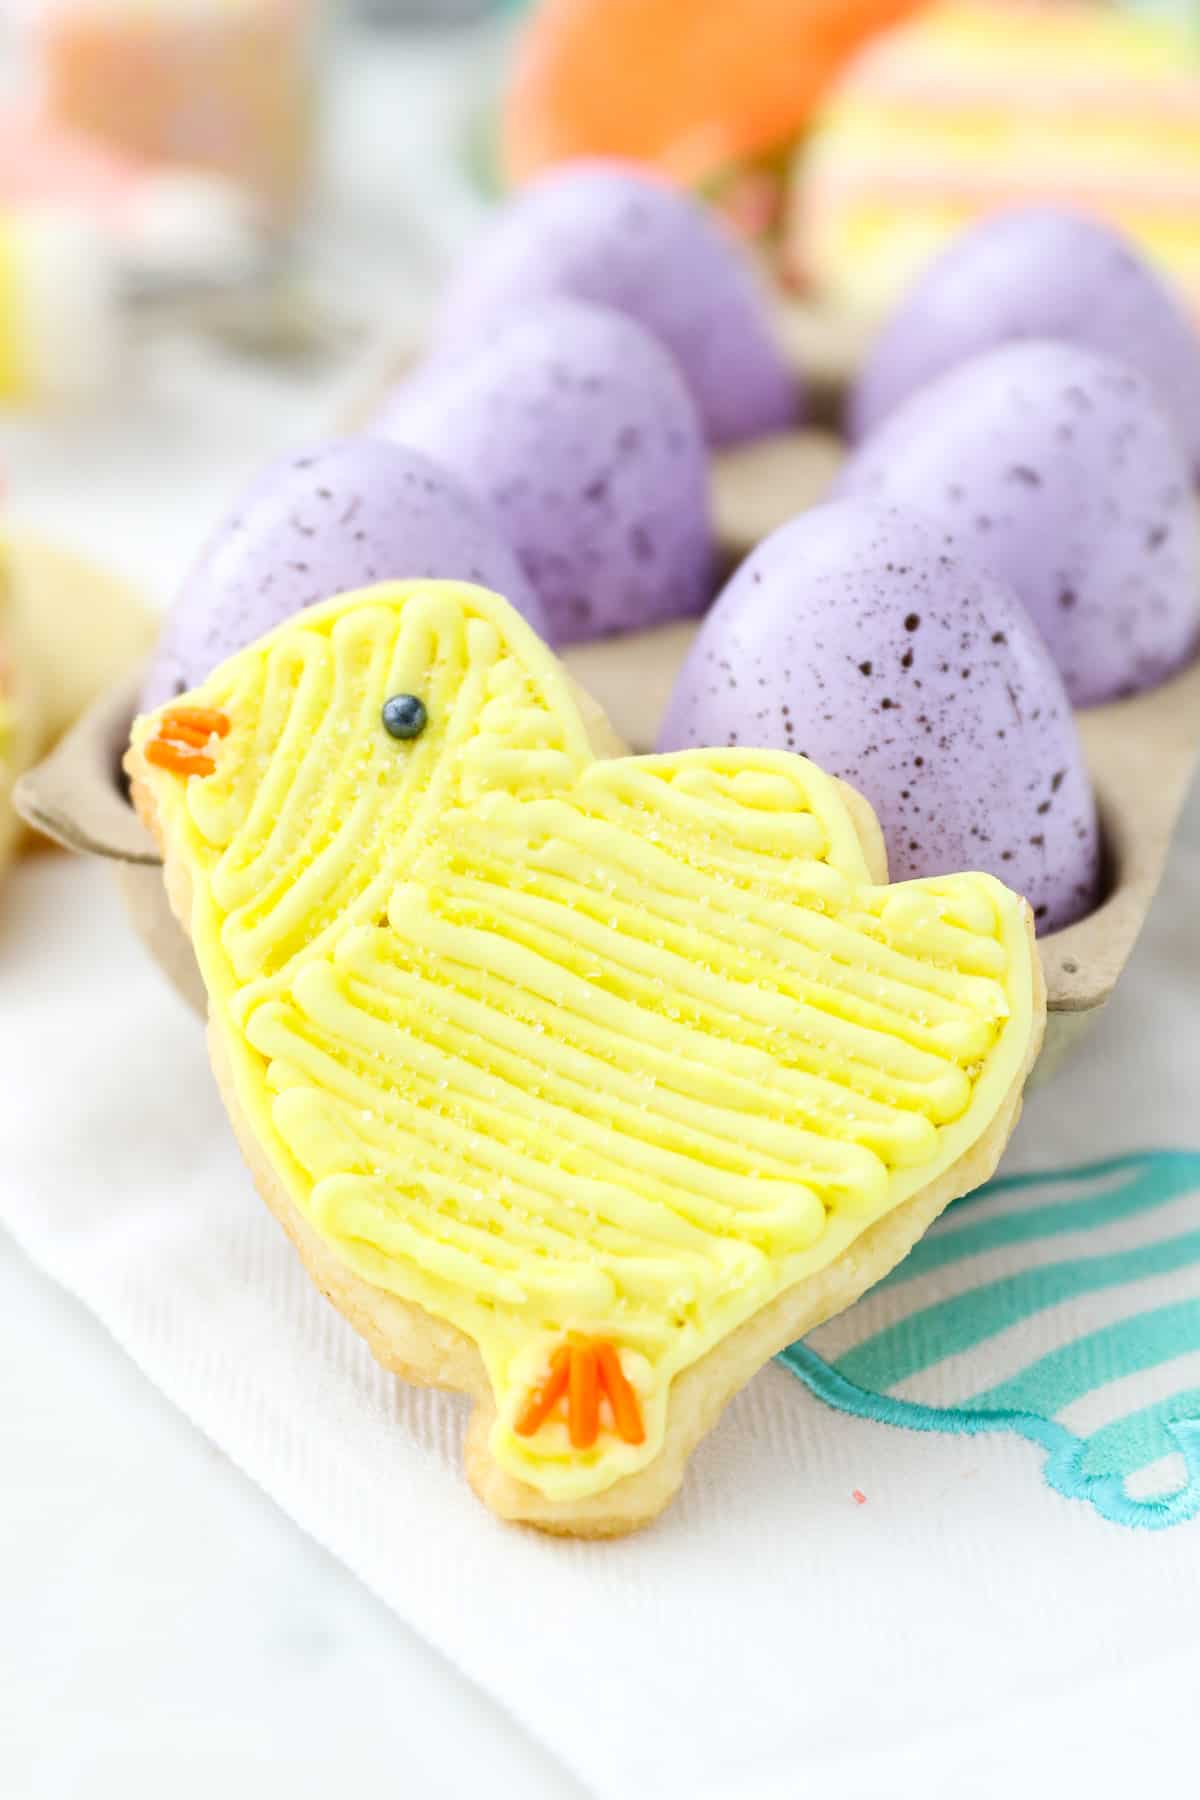 A chick-shaped Easter cookie frosted with yellow buttercream frosting, propped up against a carton of speckled Easter eggs.